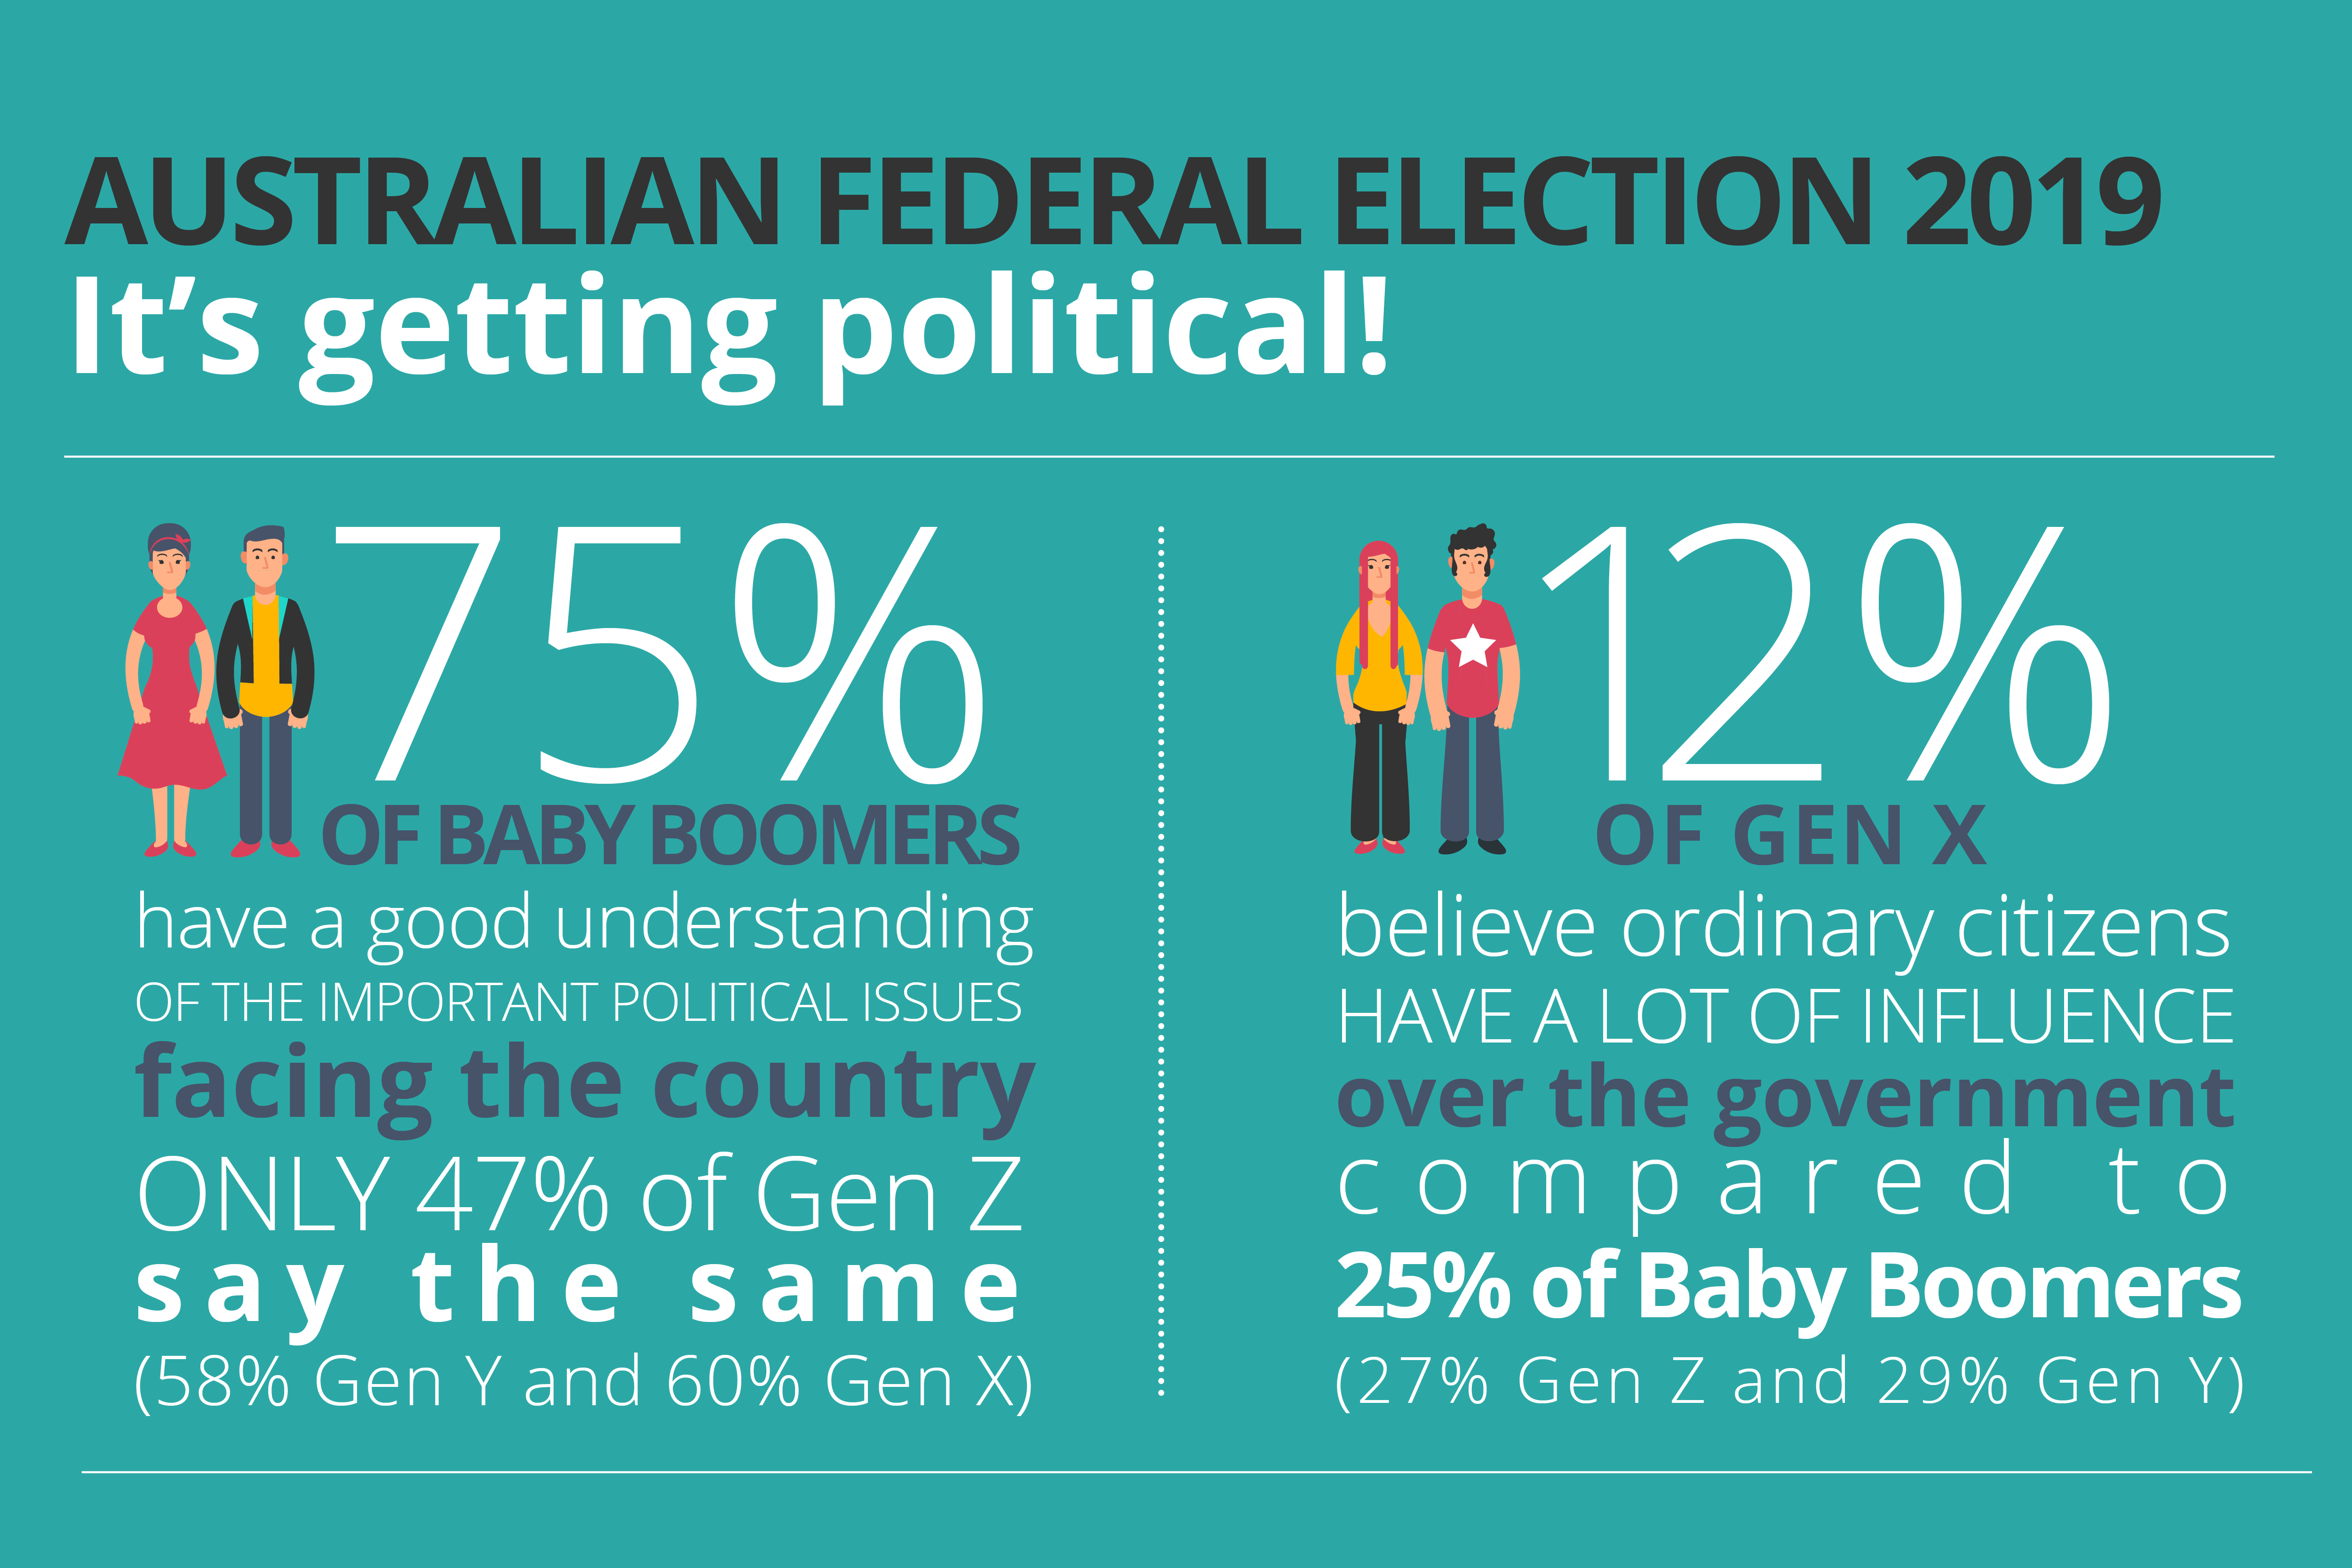 Australian federal election: It’s getting political!